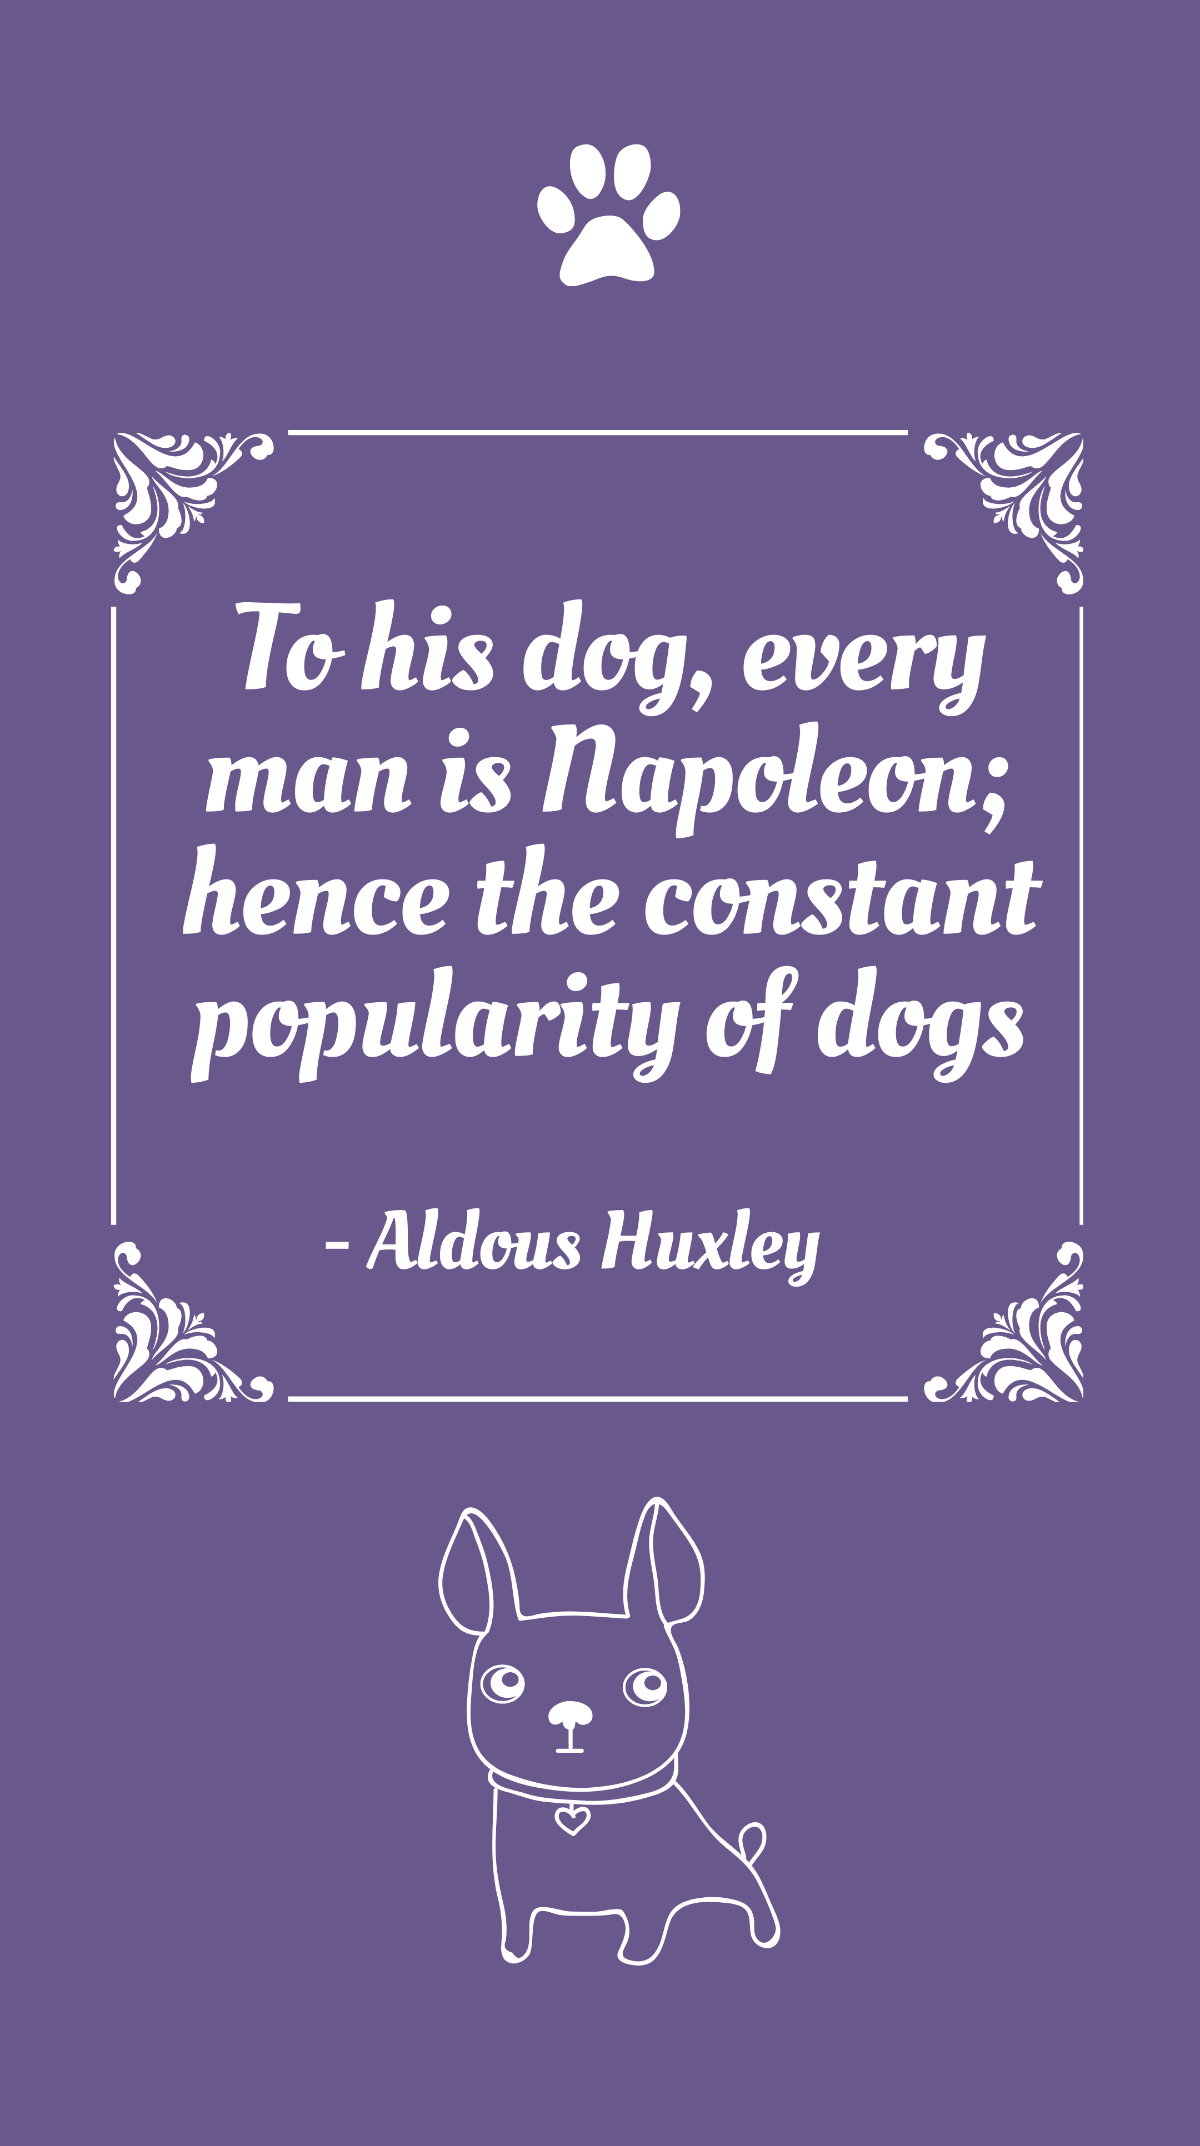 Aldous Huxley - To his dog, every man is Napoleon; hence the constant popularity of dogs Template